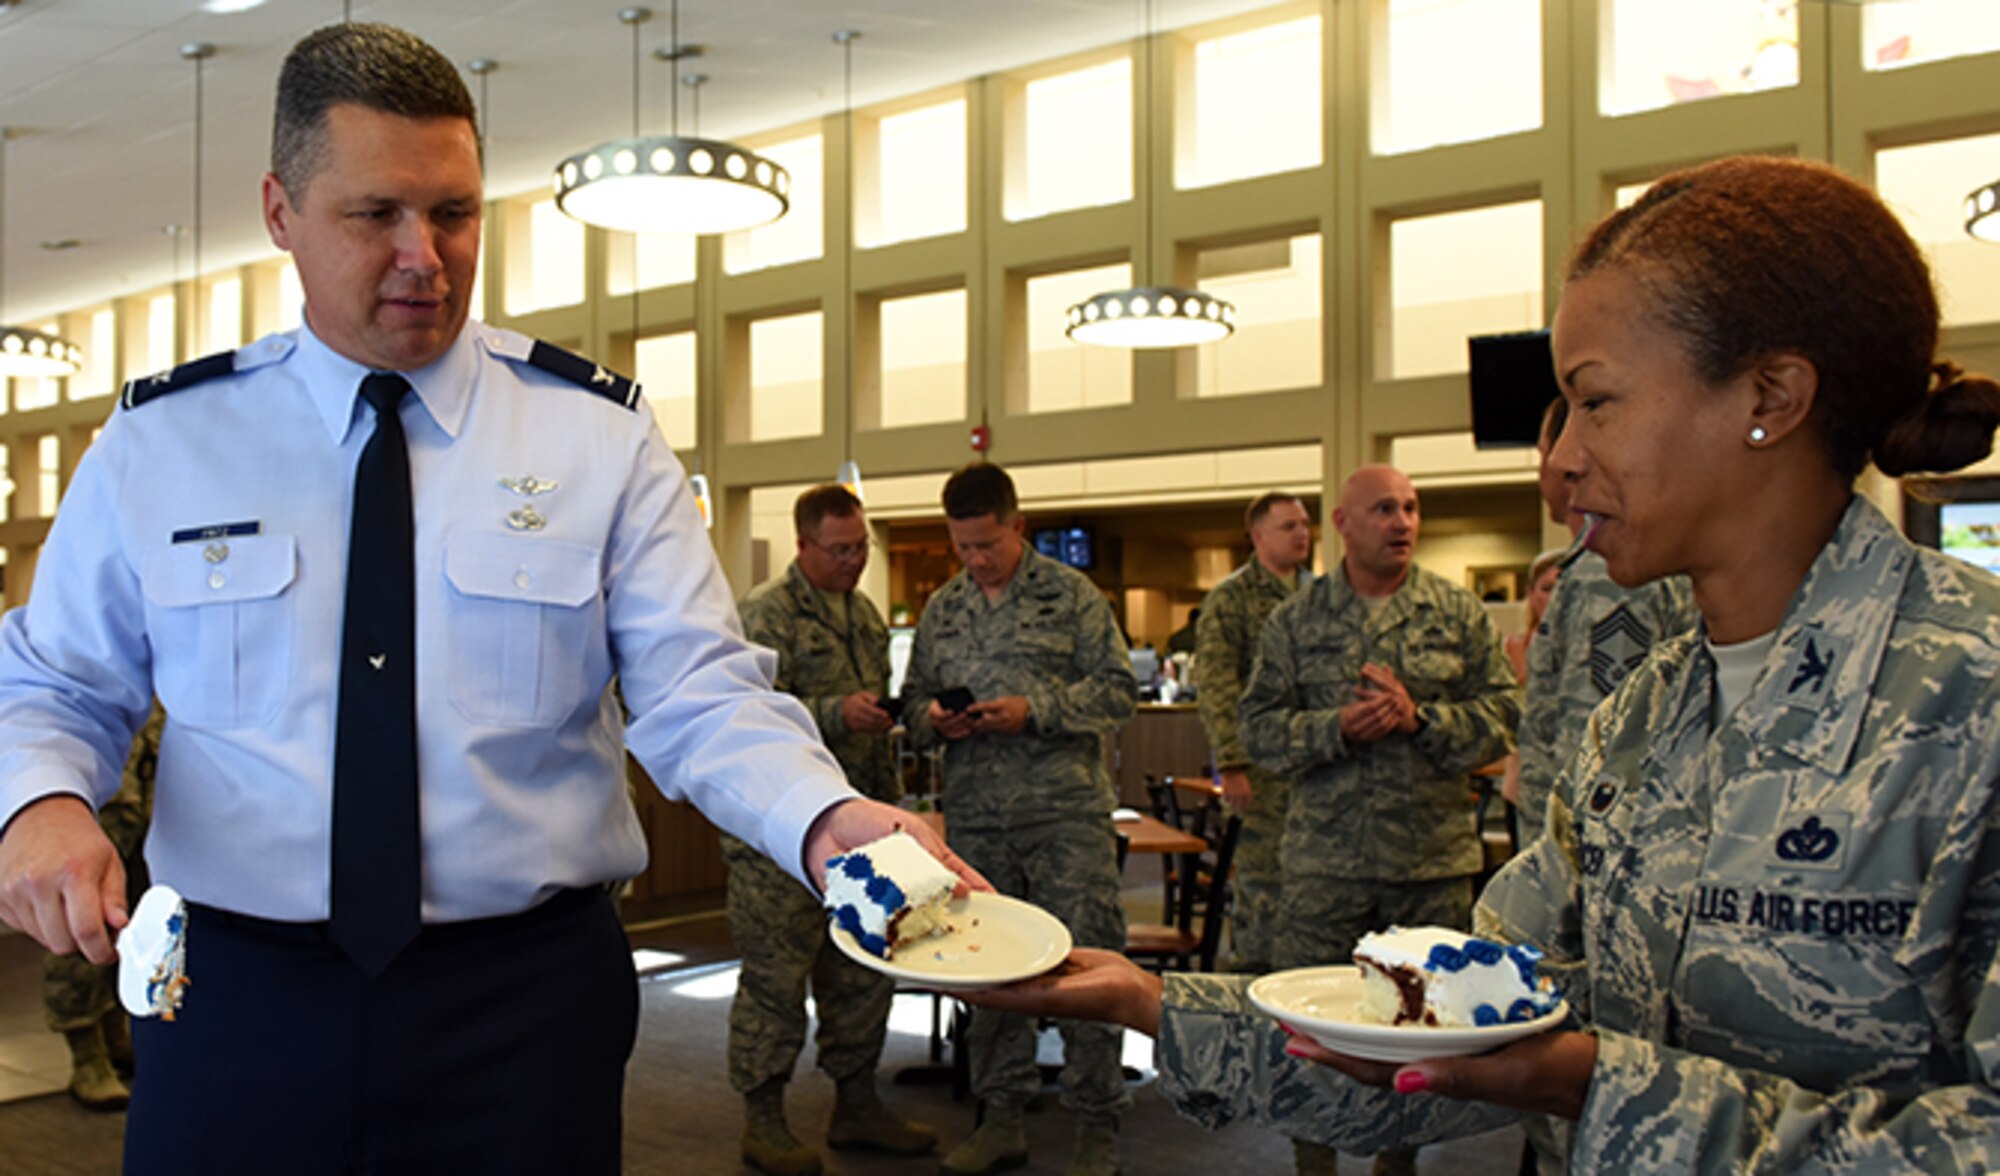 Col. Matthew Fritz, 92nd Air Refueling Wing vice commander, serves Col. Yvonne Spencer, 92nd Mission Support Group commander, a piece of birthday cake Sept. 13, 2016, at Fairchild Air Force Base. The cake was part of ceremony celebrating the United States Air Force's 69th Birthday. (U.S. Air Force photo/Airman 1st Class Ryan Lackey)